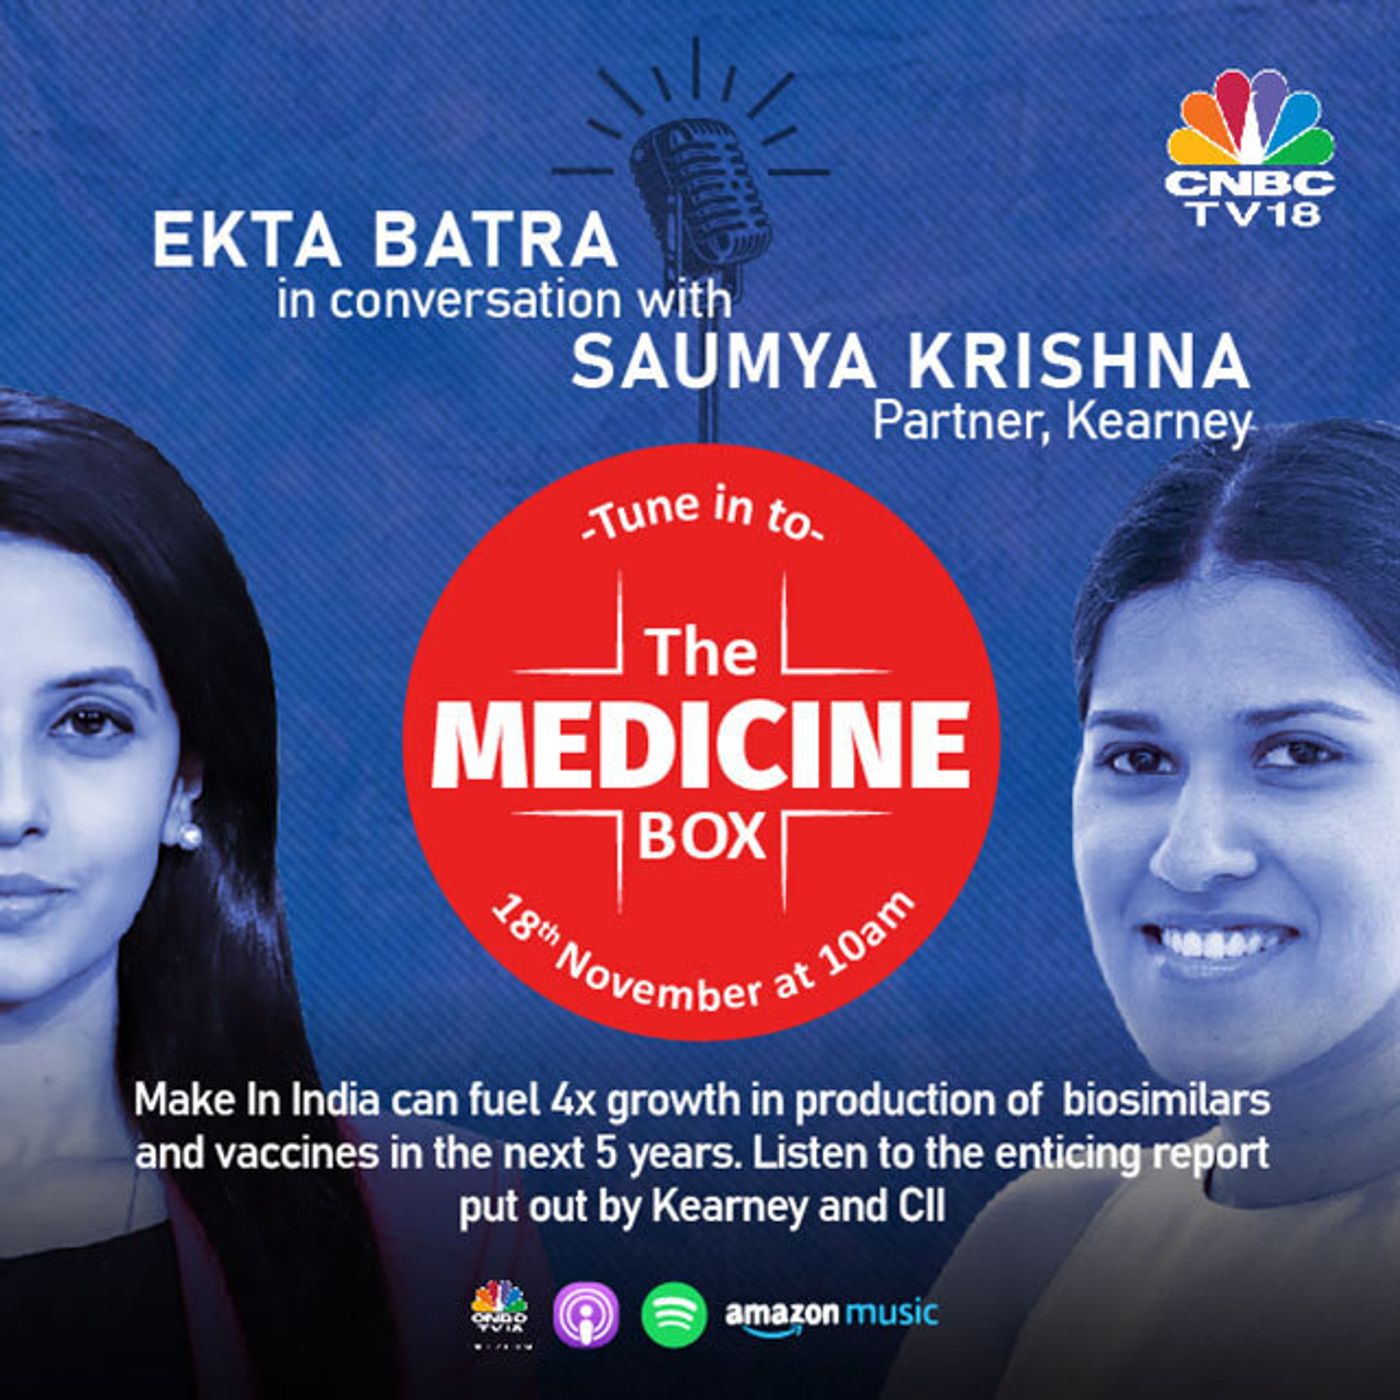 30: The Medicine Box: Kearney’s Saumya Krishna explains how ‘Make In India’ can fuel 4x growth in vaccines, biosimilars by 2026